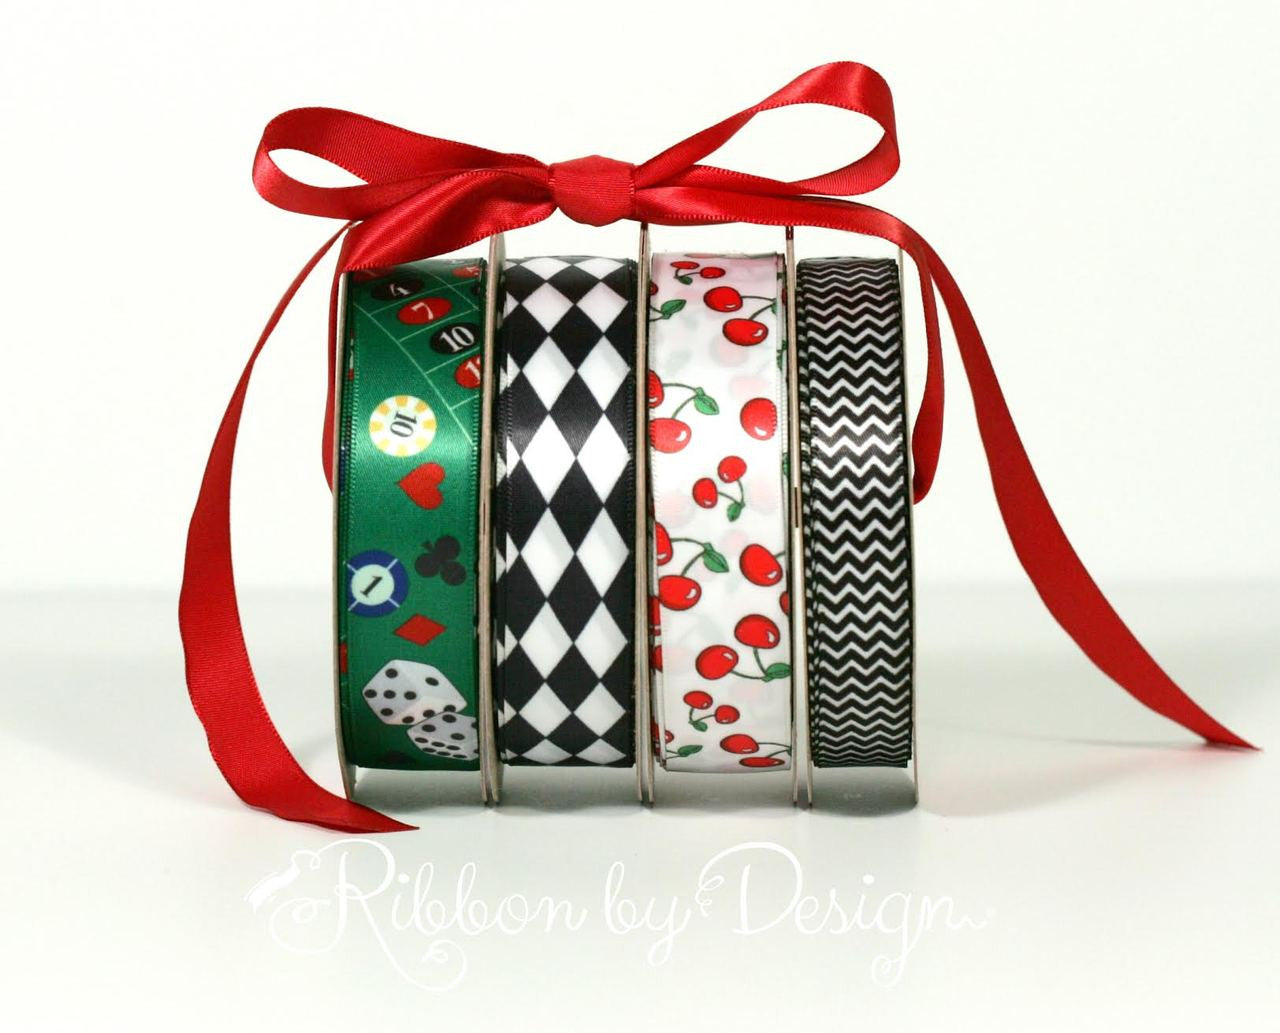 Casino ribbon mixes so nicely with black and white chevron and harlequin and of course cherries!